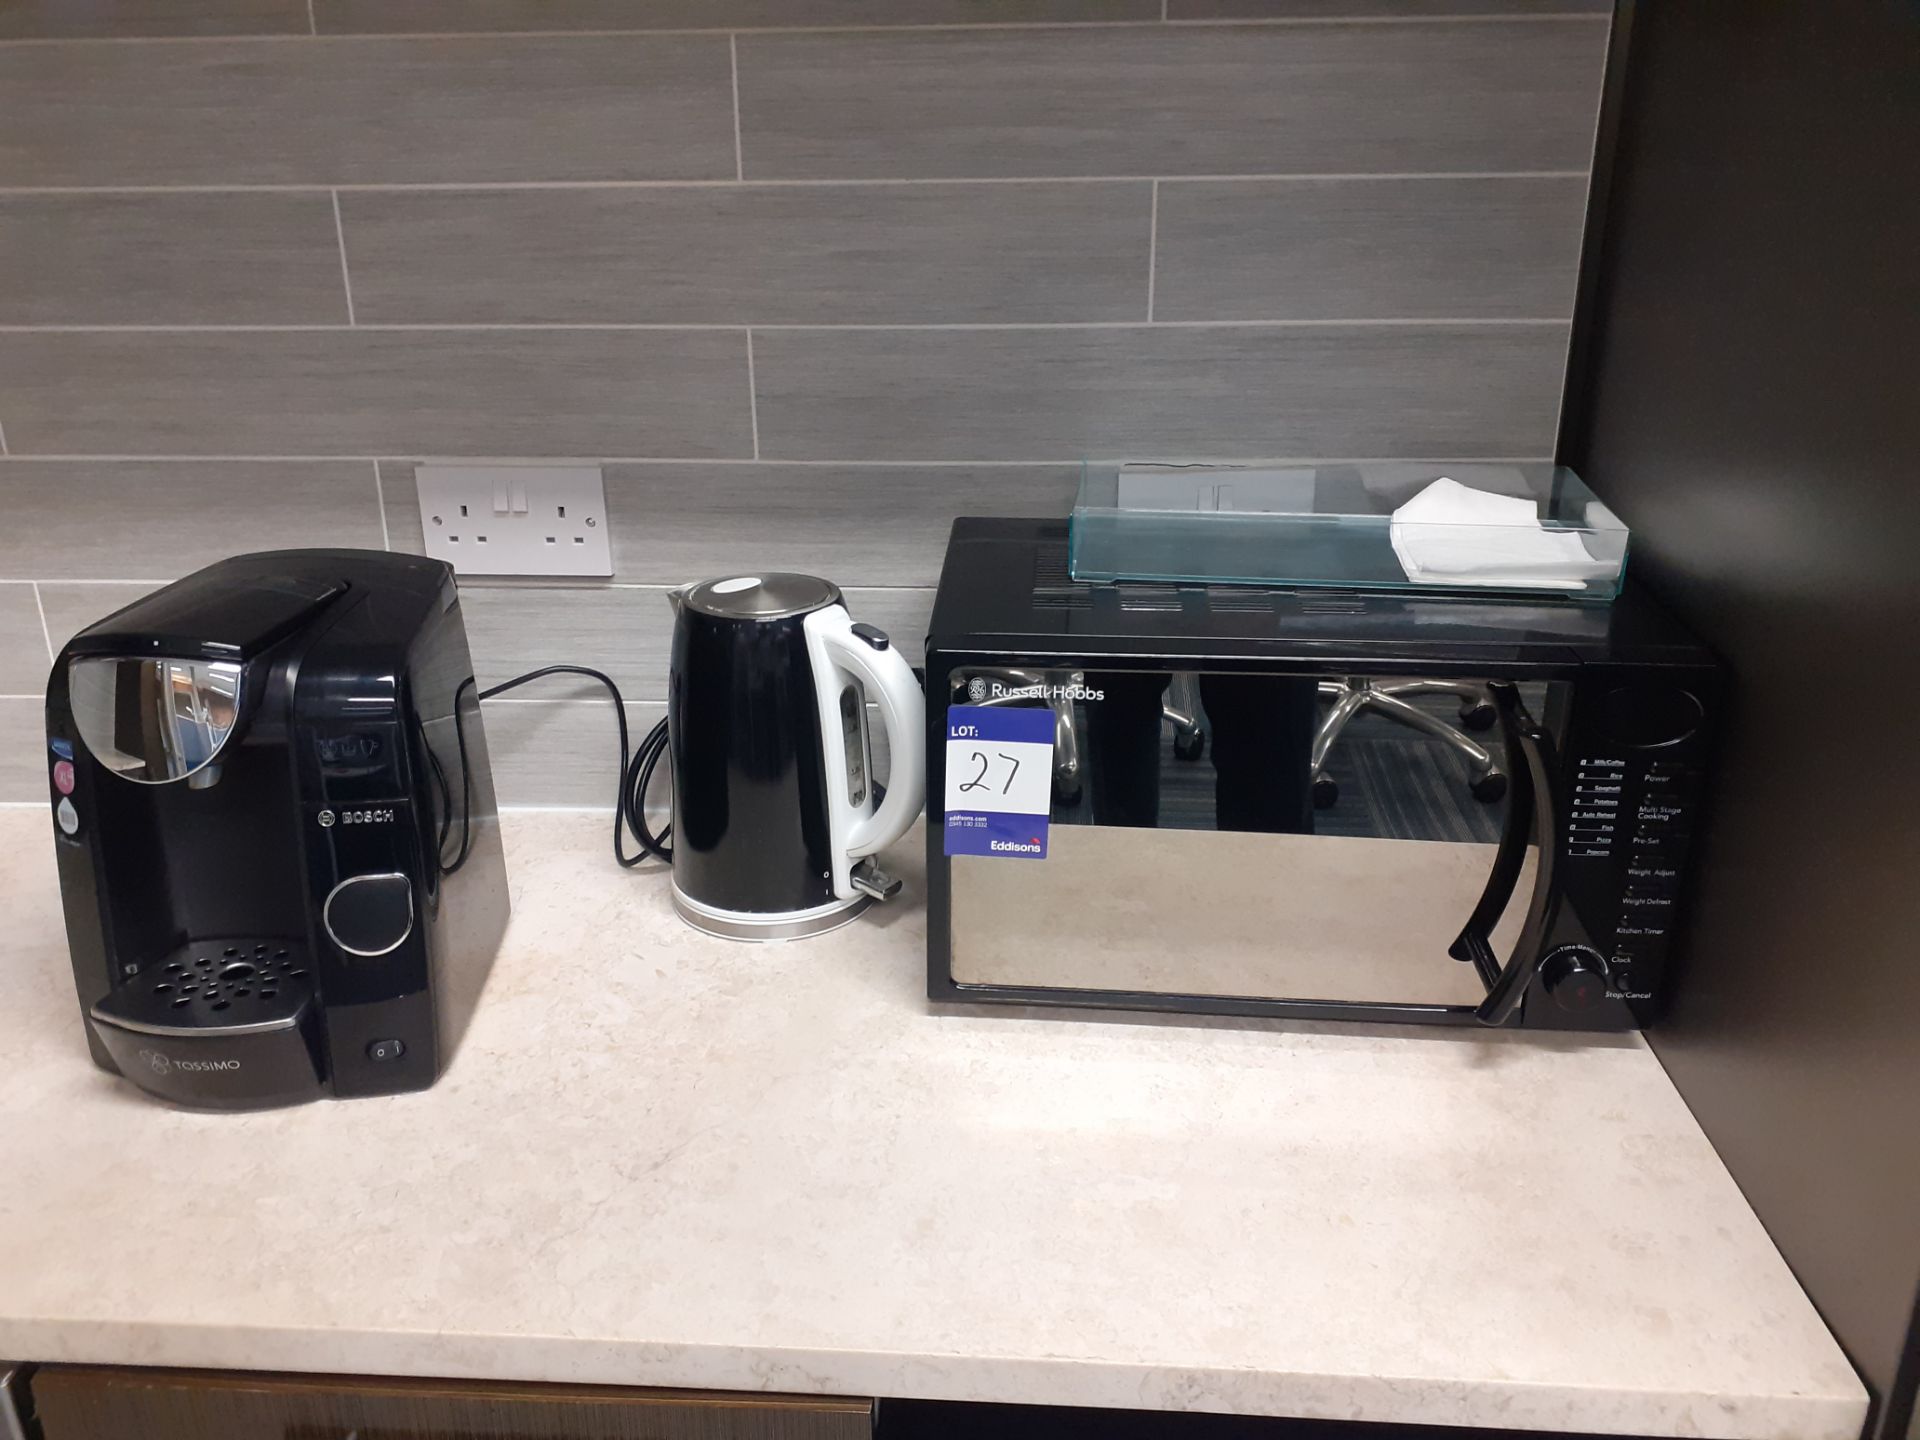 Bosch Tassimo coffee machine, Russell Hobbs microwave oven, cutlery, and glassware. Location –